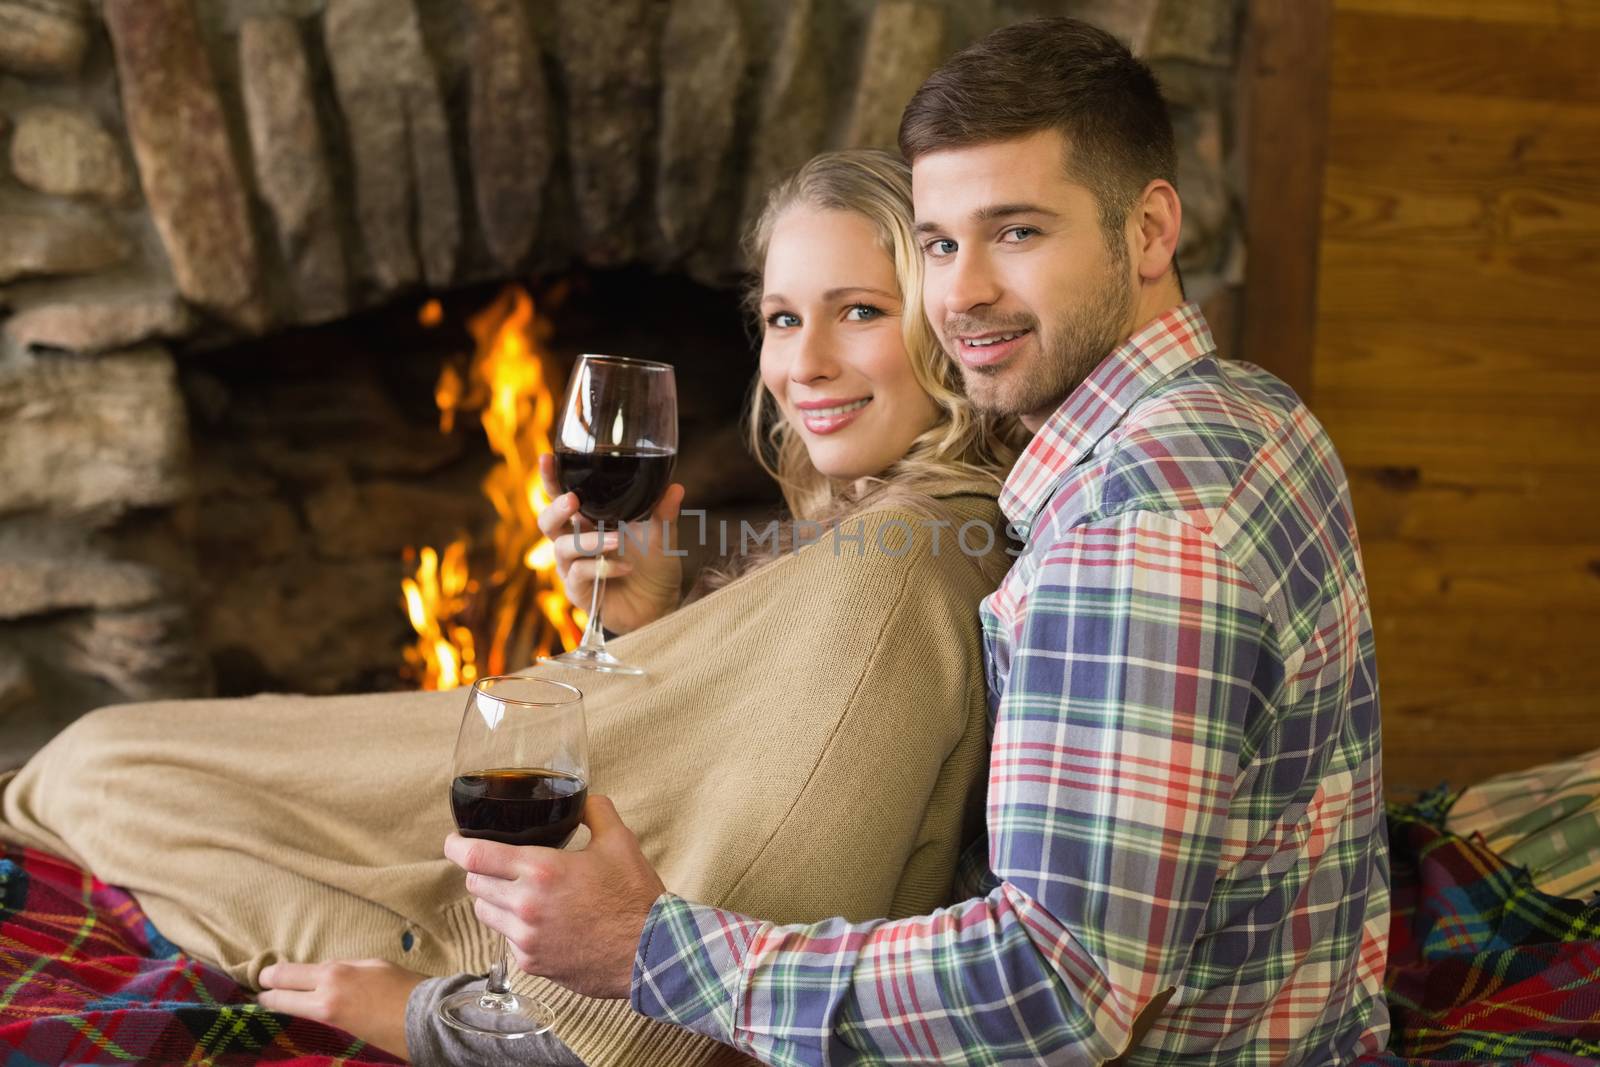 Rear view portrait of a romantic young couple with wineglasses in front of lit fireplace